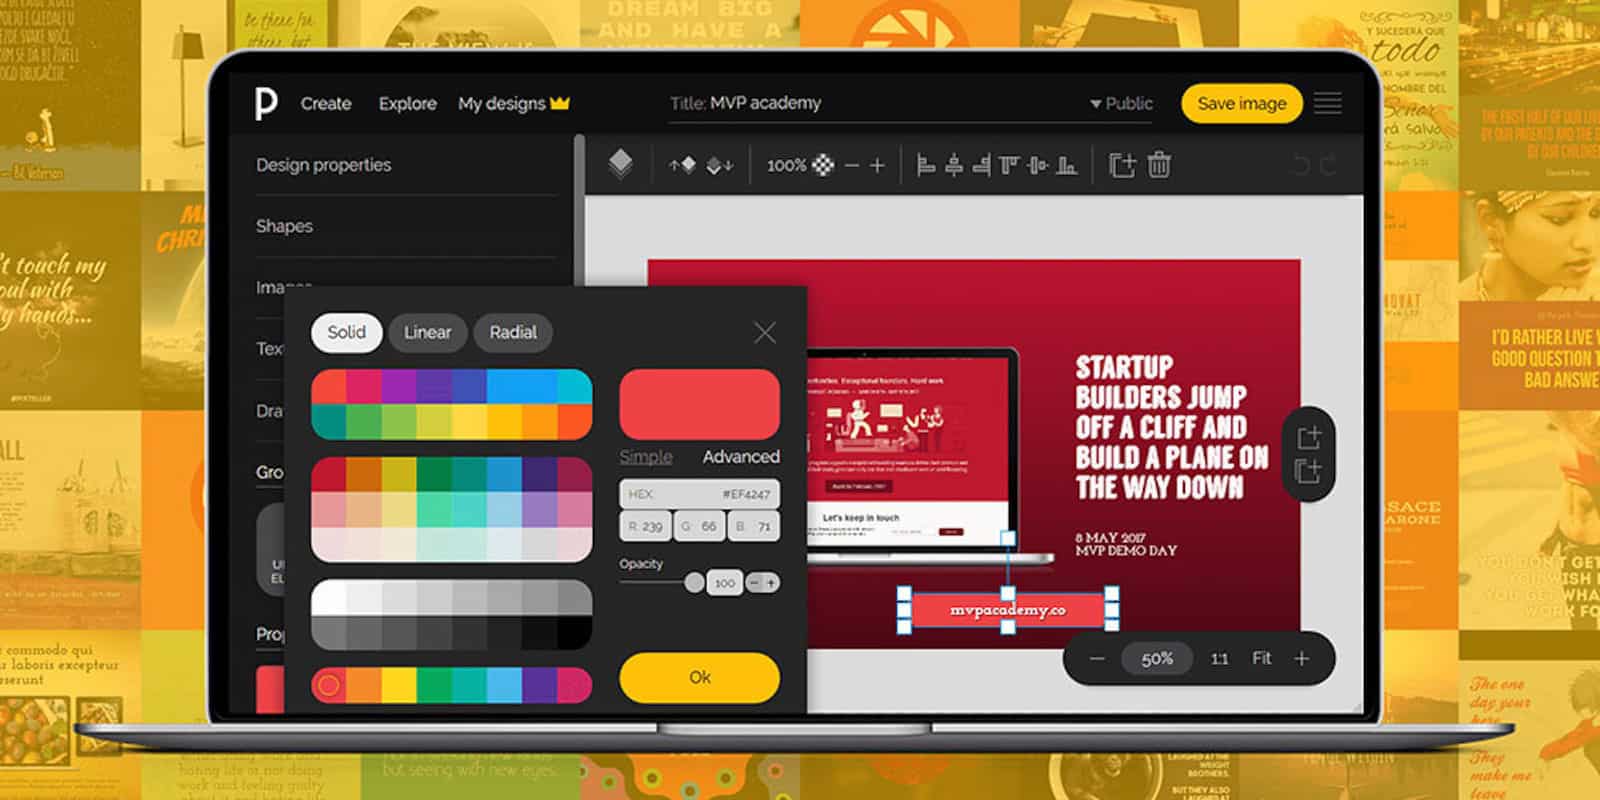 No graphic design skills? No problem. This web based app makes graphic design accessible to anyone.